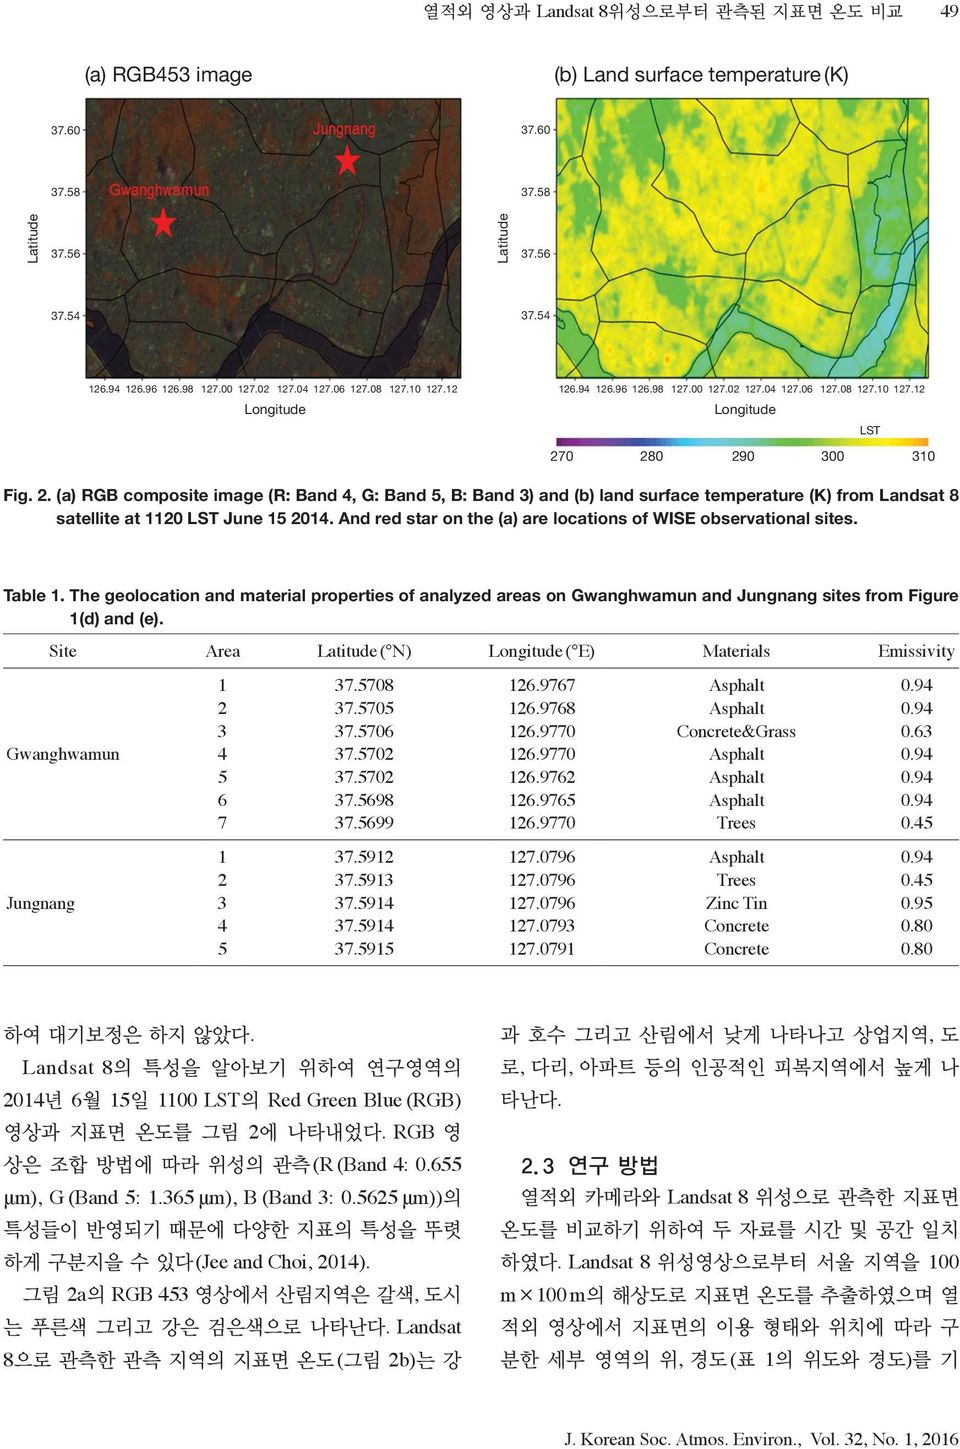 28 29 3 31 Fig. 2. (a) RGB composite image (R: Band 4, G: Band 5, B: Band 3) and (b) land surface temperature (K) from Landsat 8 satellite at 112 LST June 15 214.